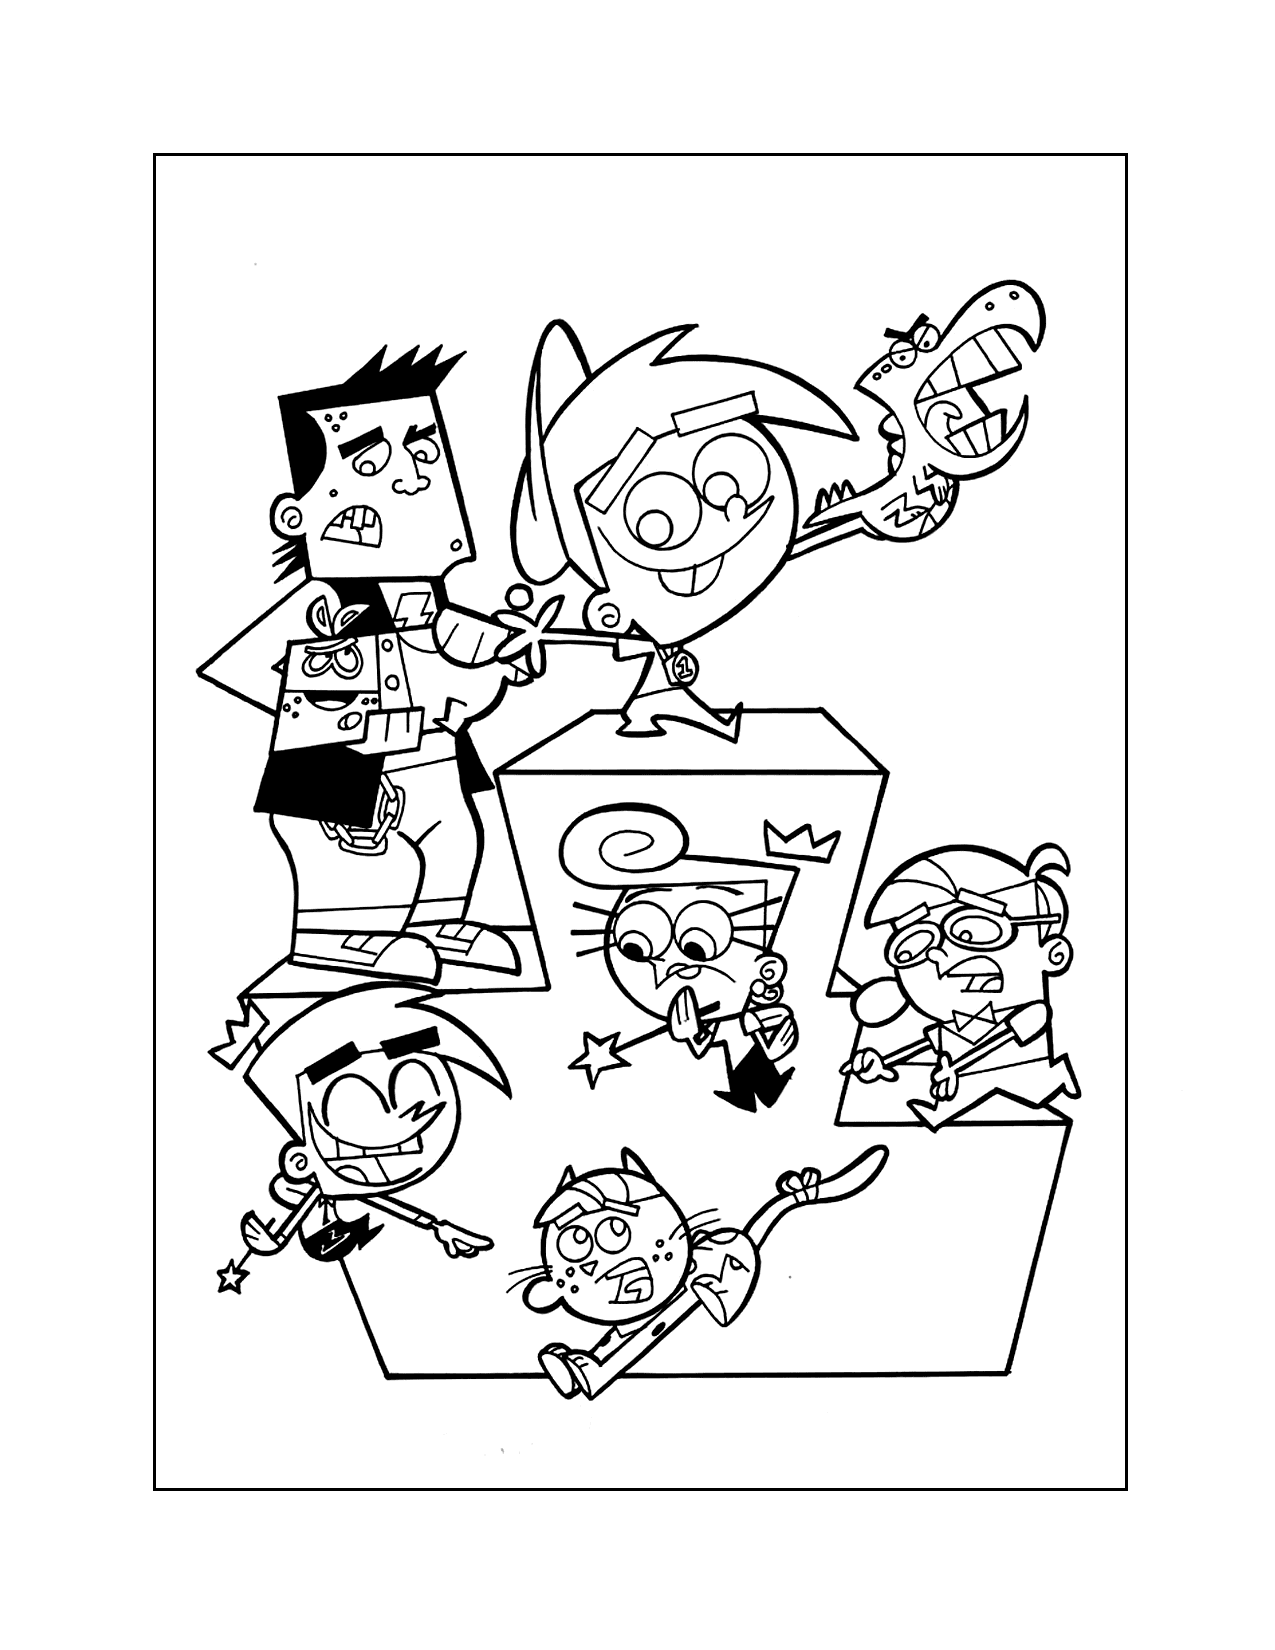 Funny Fairly Odd Parents Characters Coloring Page